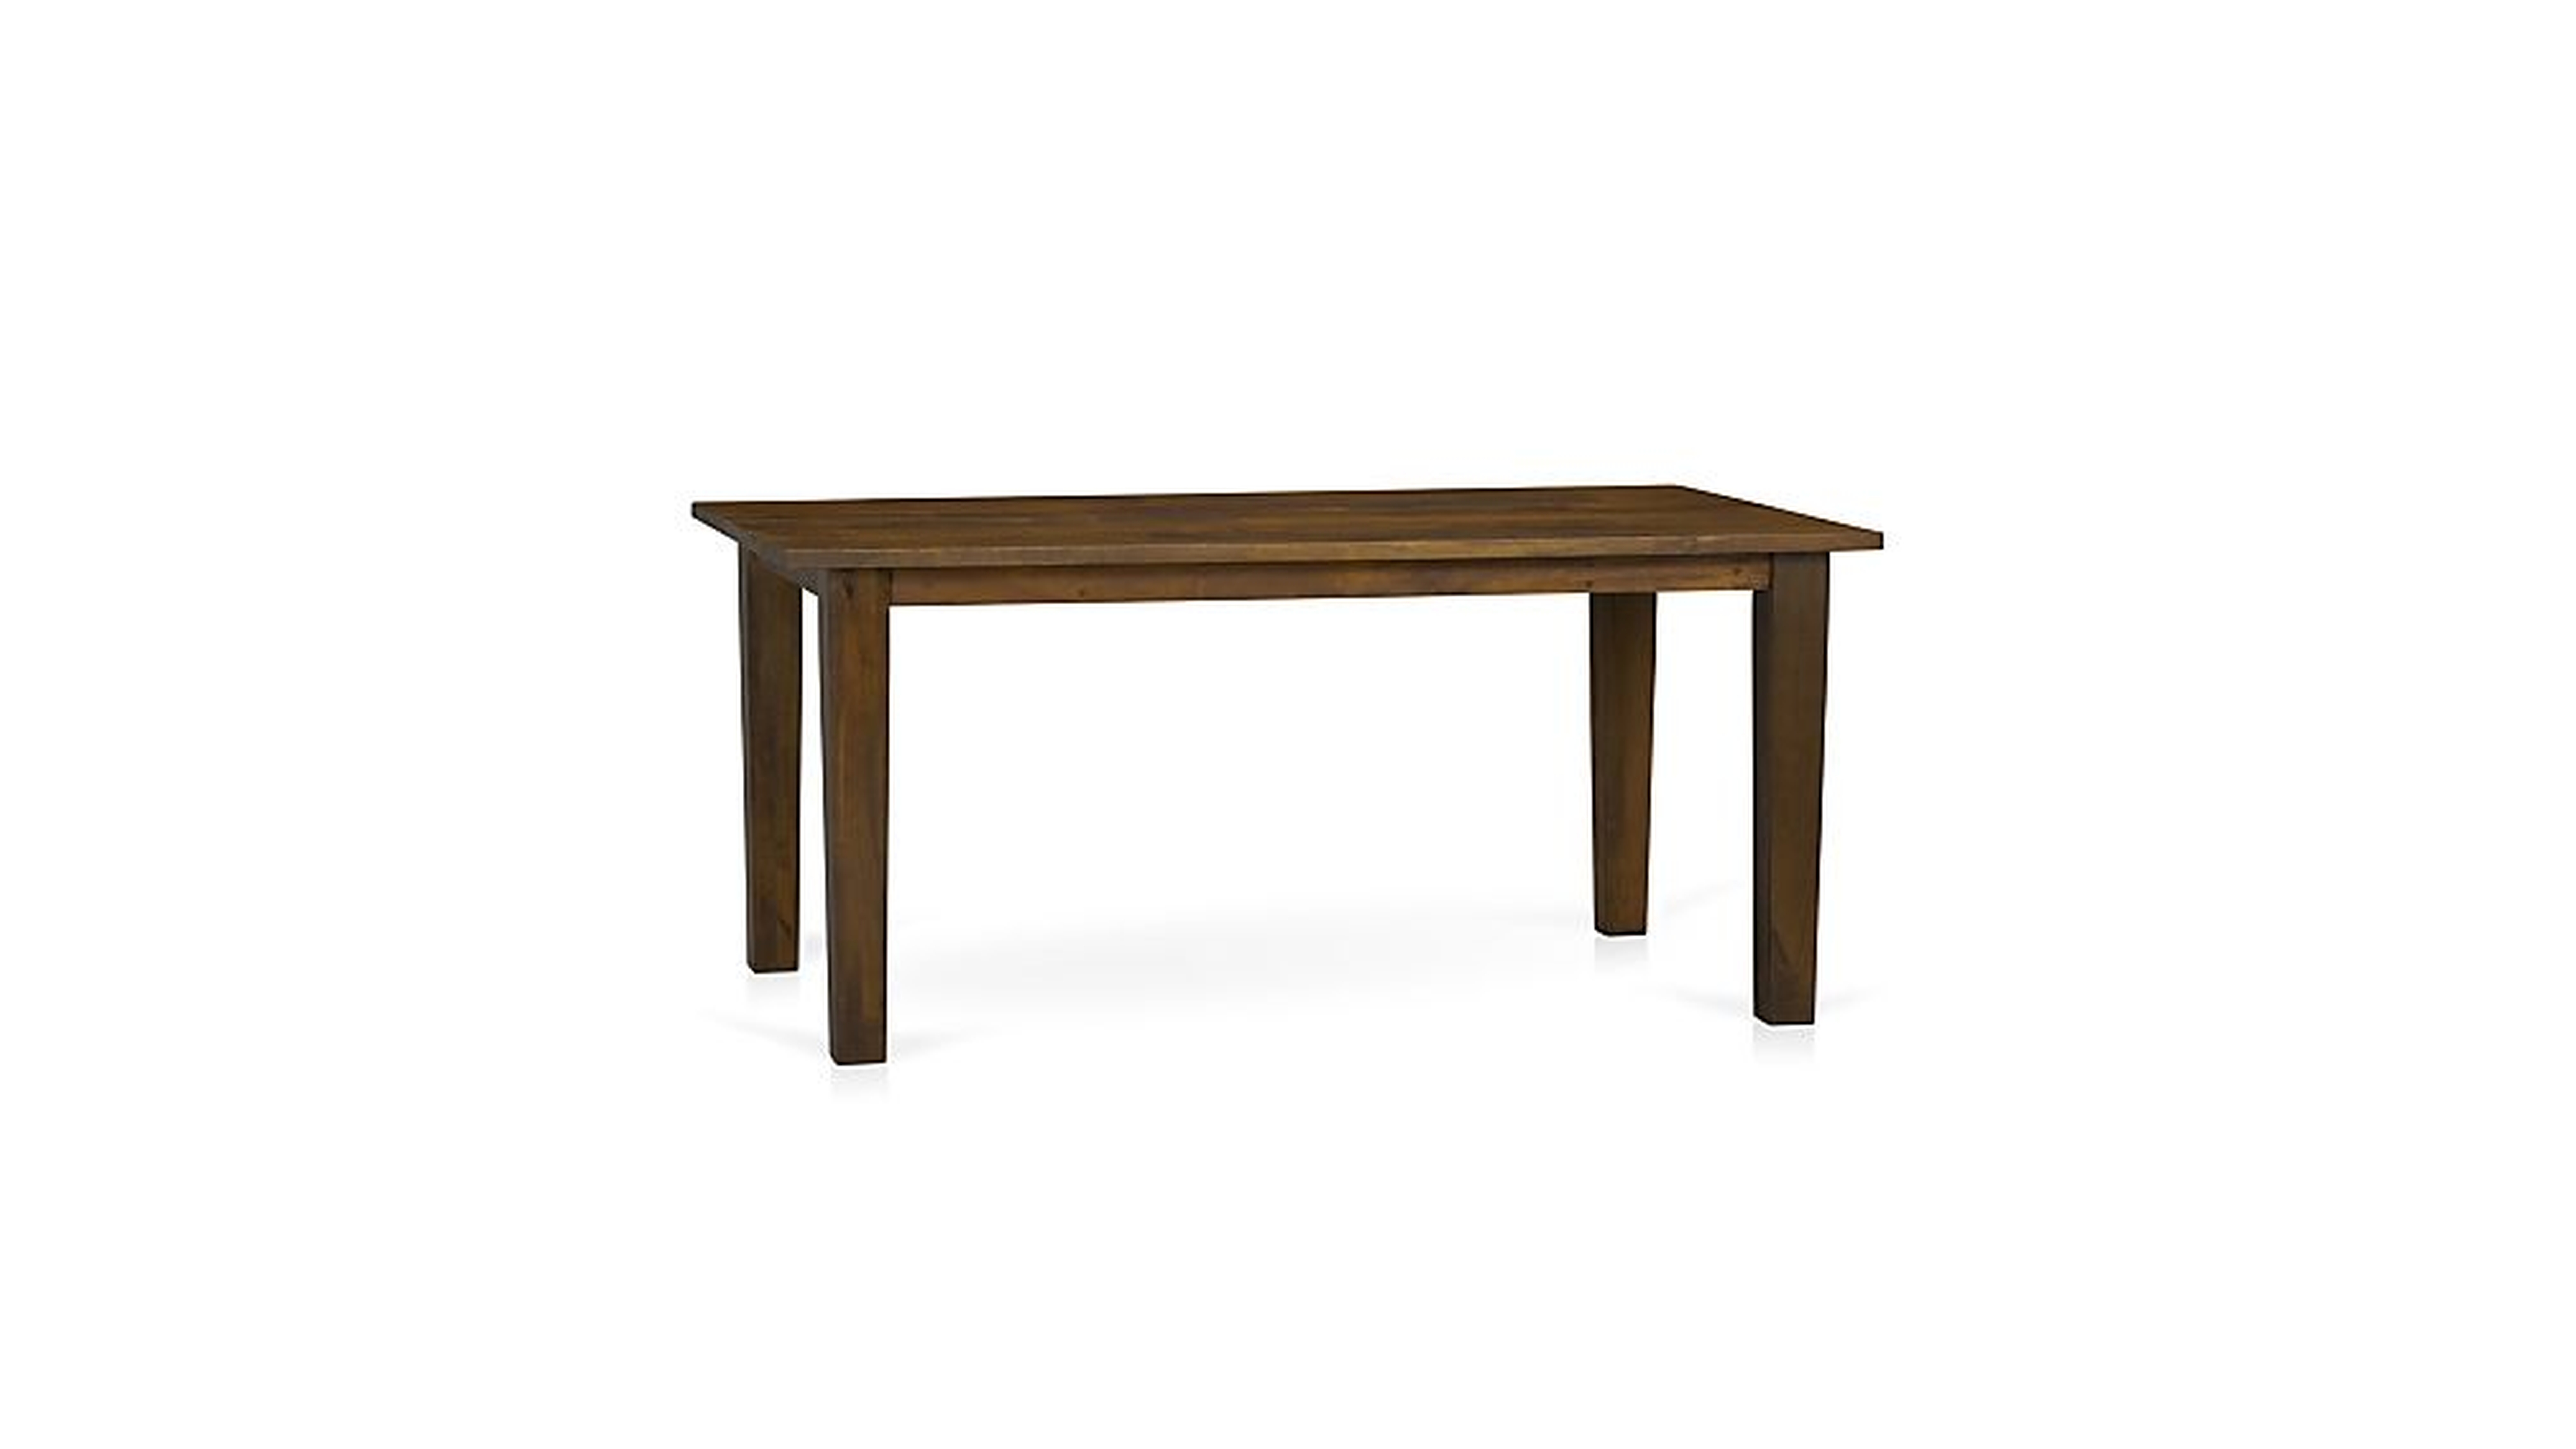 Basque Honey 65" Dining Table - Crate and Barrel